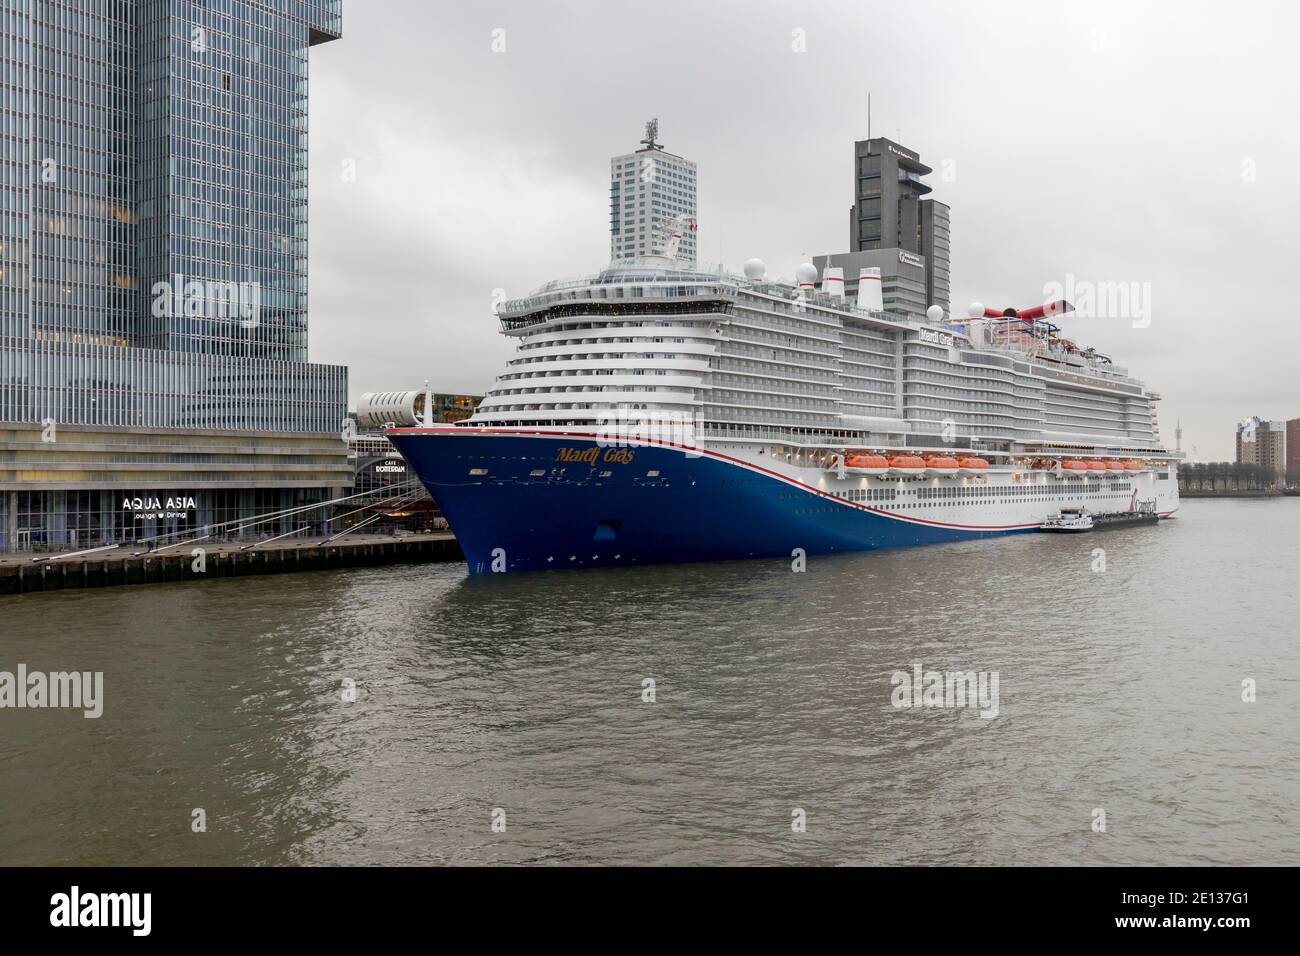 Rotterdam, Netherlands - 2020-12-22: Mardi Gras cruise ship of Carnival lines being resupplied during maiden call to Rotterdam Stock Photo